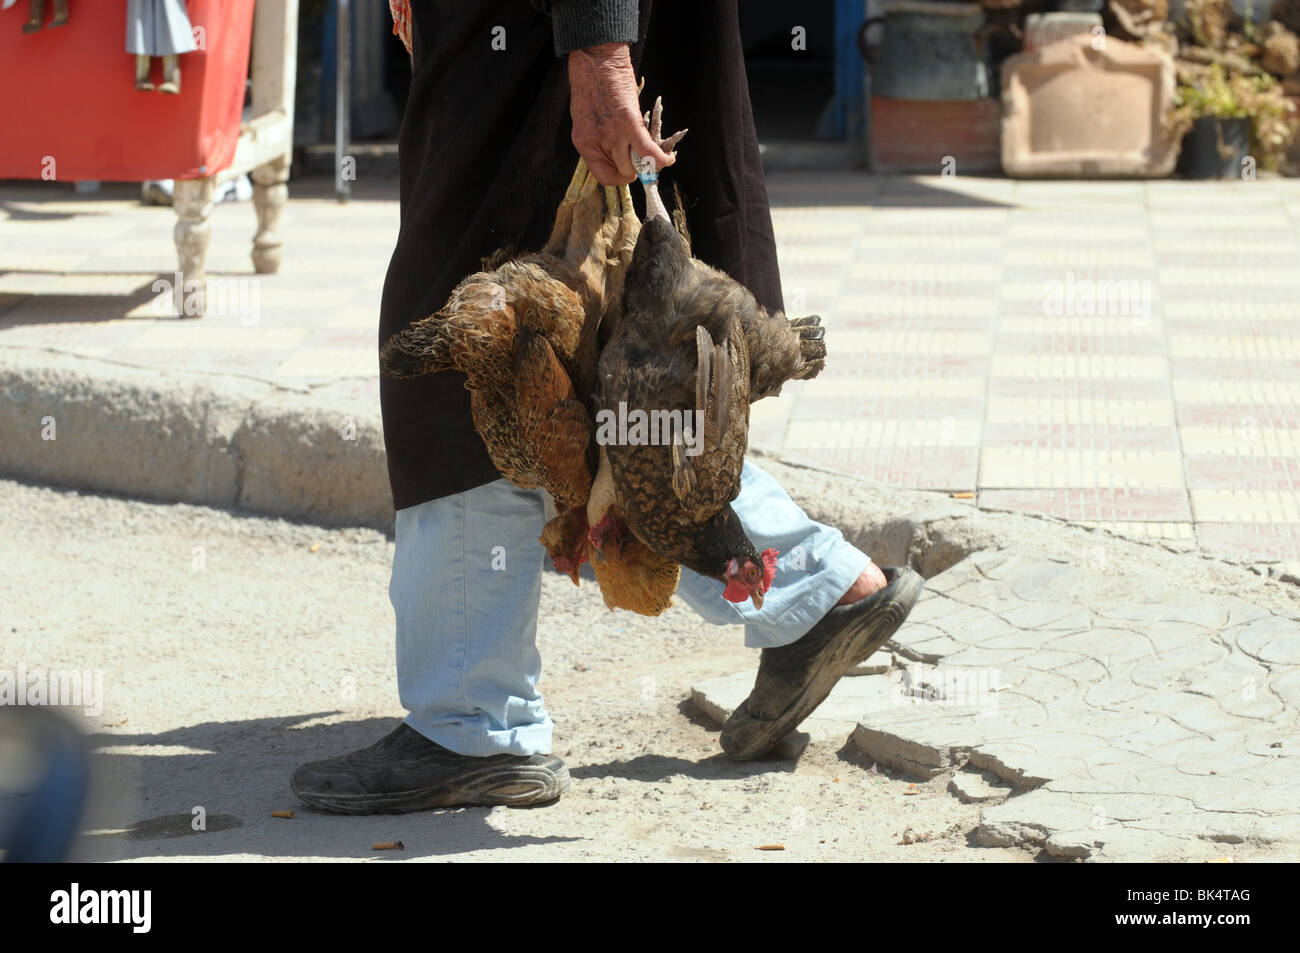 Arab man walking along the street with dead chickens Stock Photo